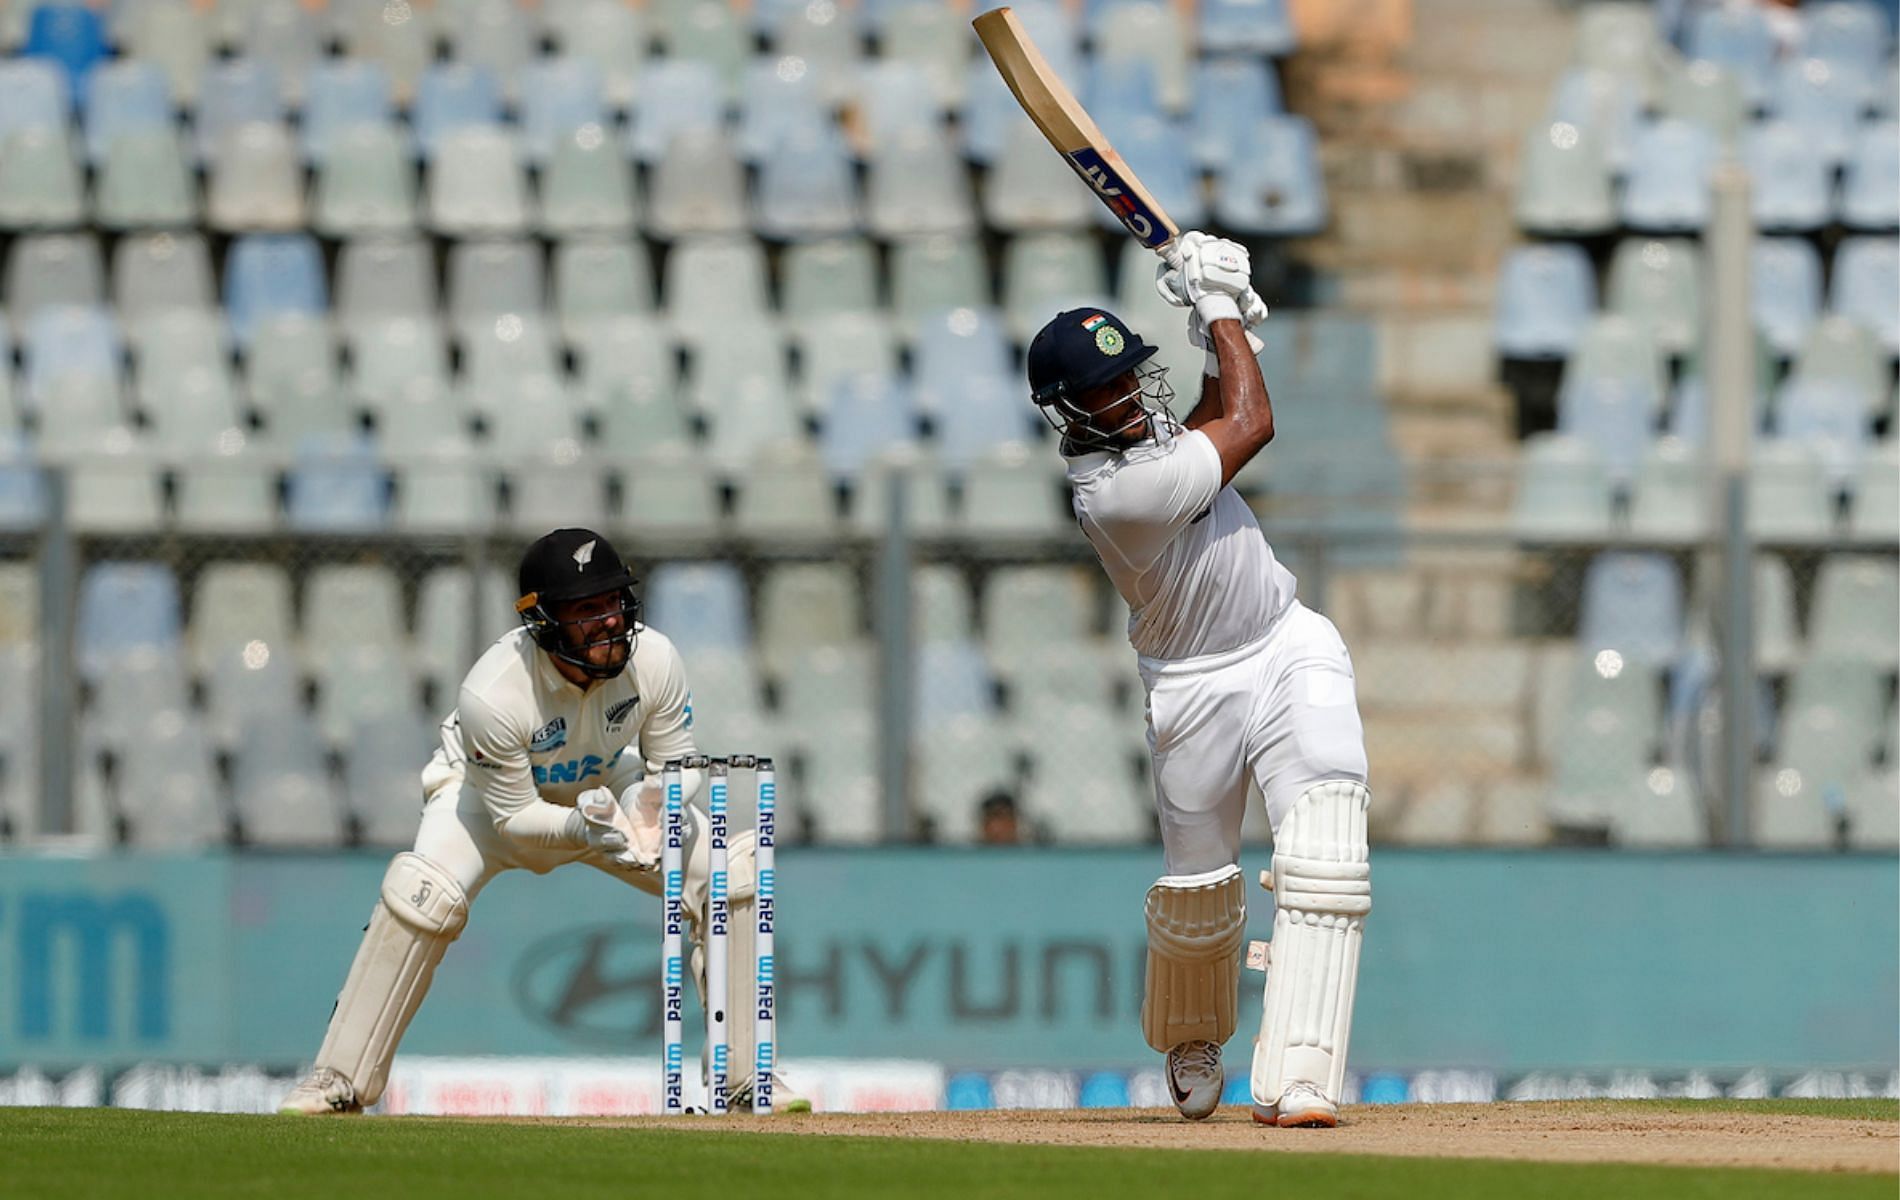 Mayank Agarwal dominated New Zealand spinners on Day 1 at the Wankhede.